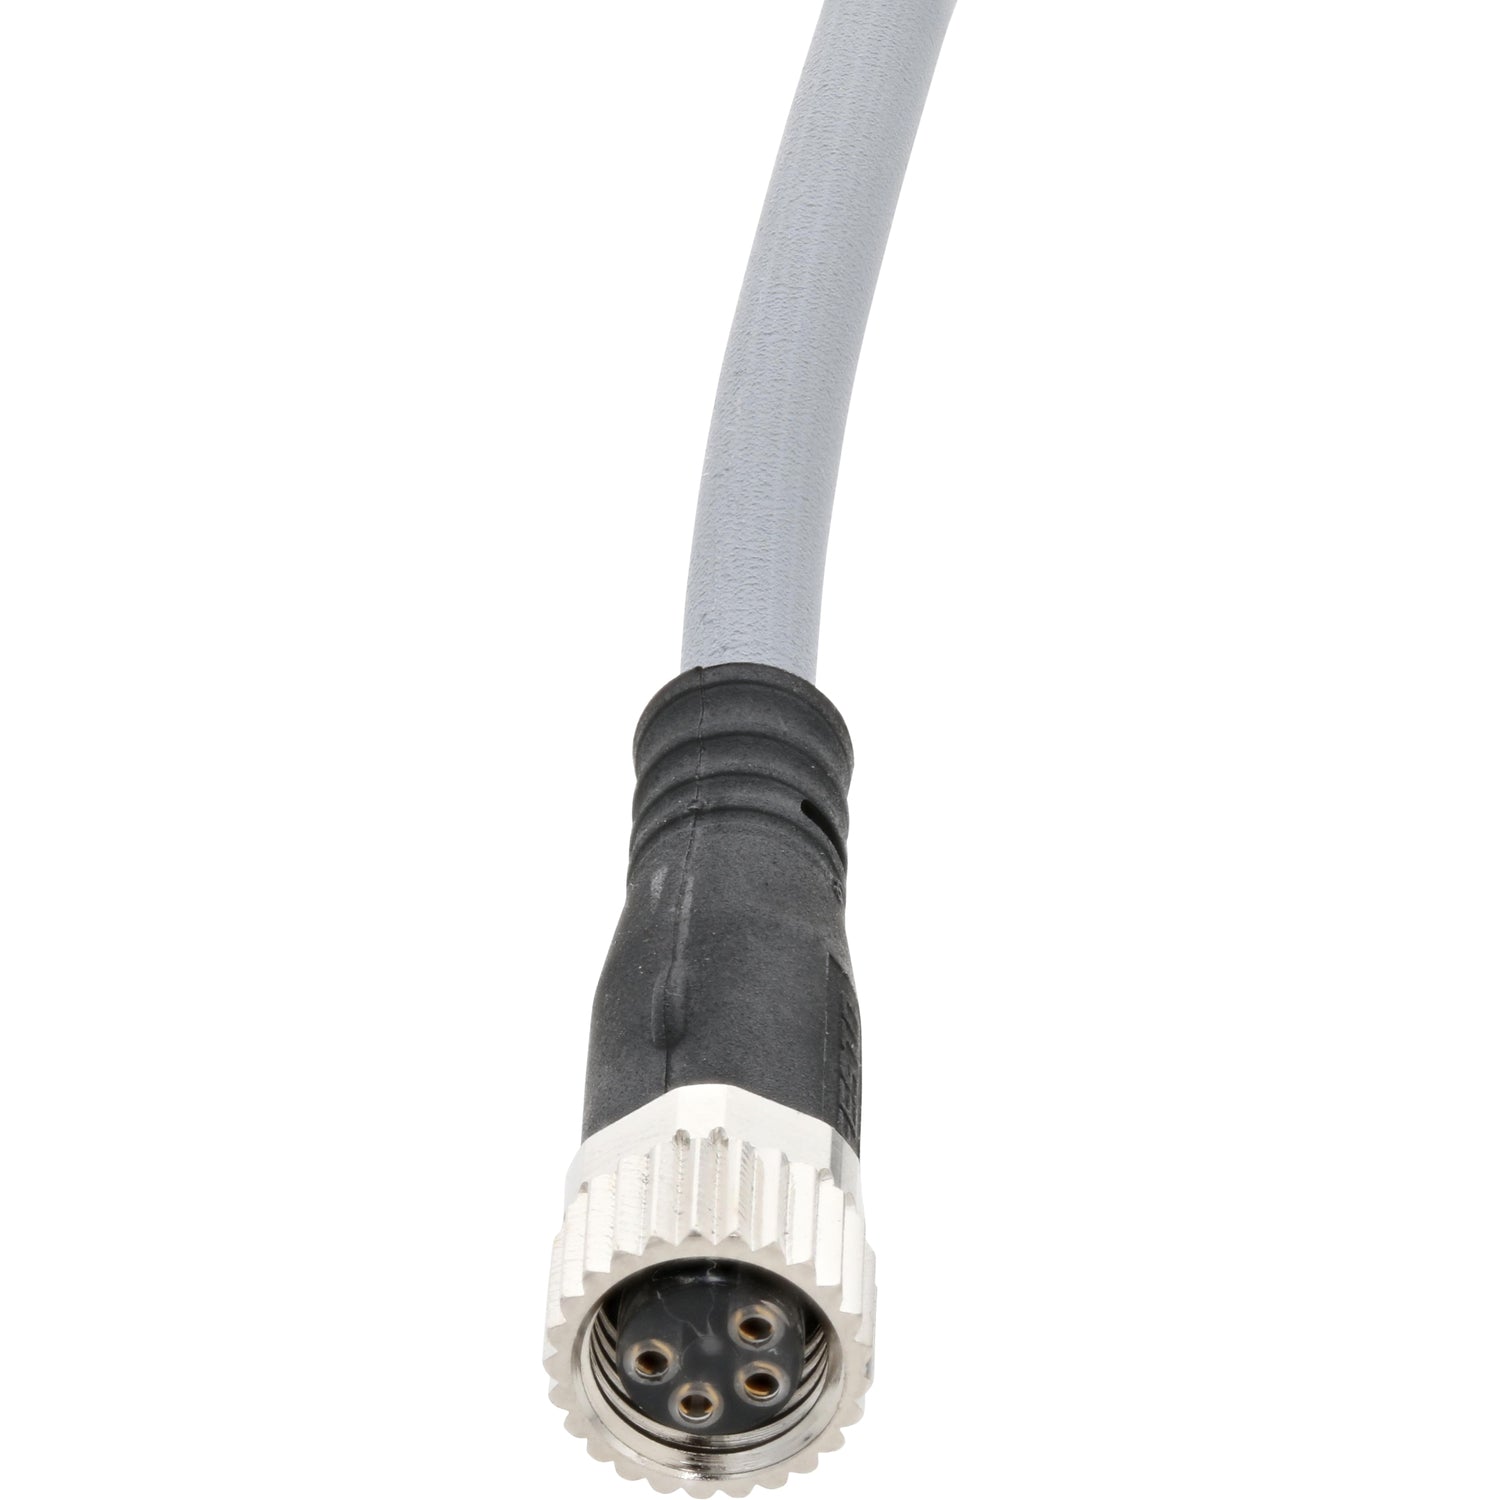 Grey connecting cable with molded female four pin plug. Cable is shown on white background. 